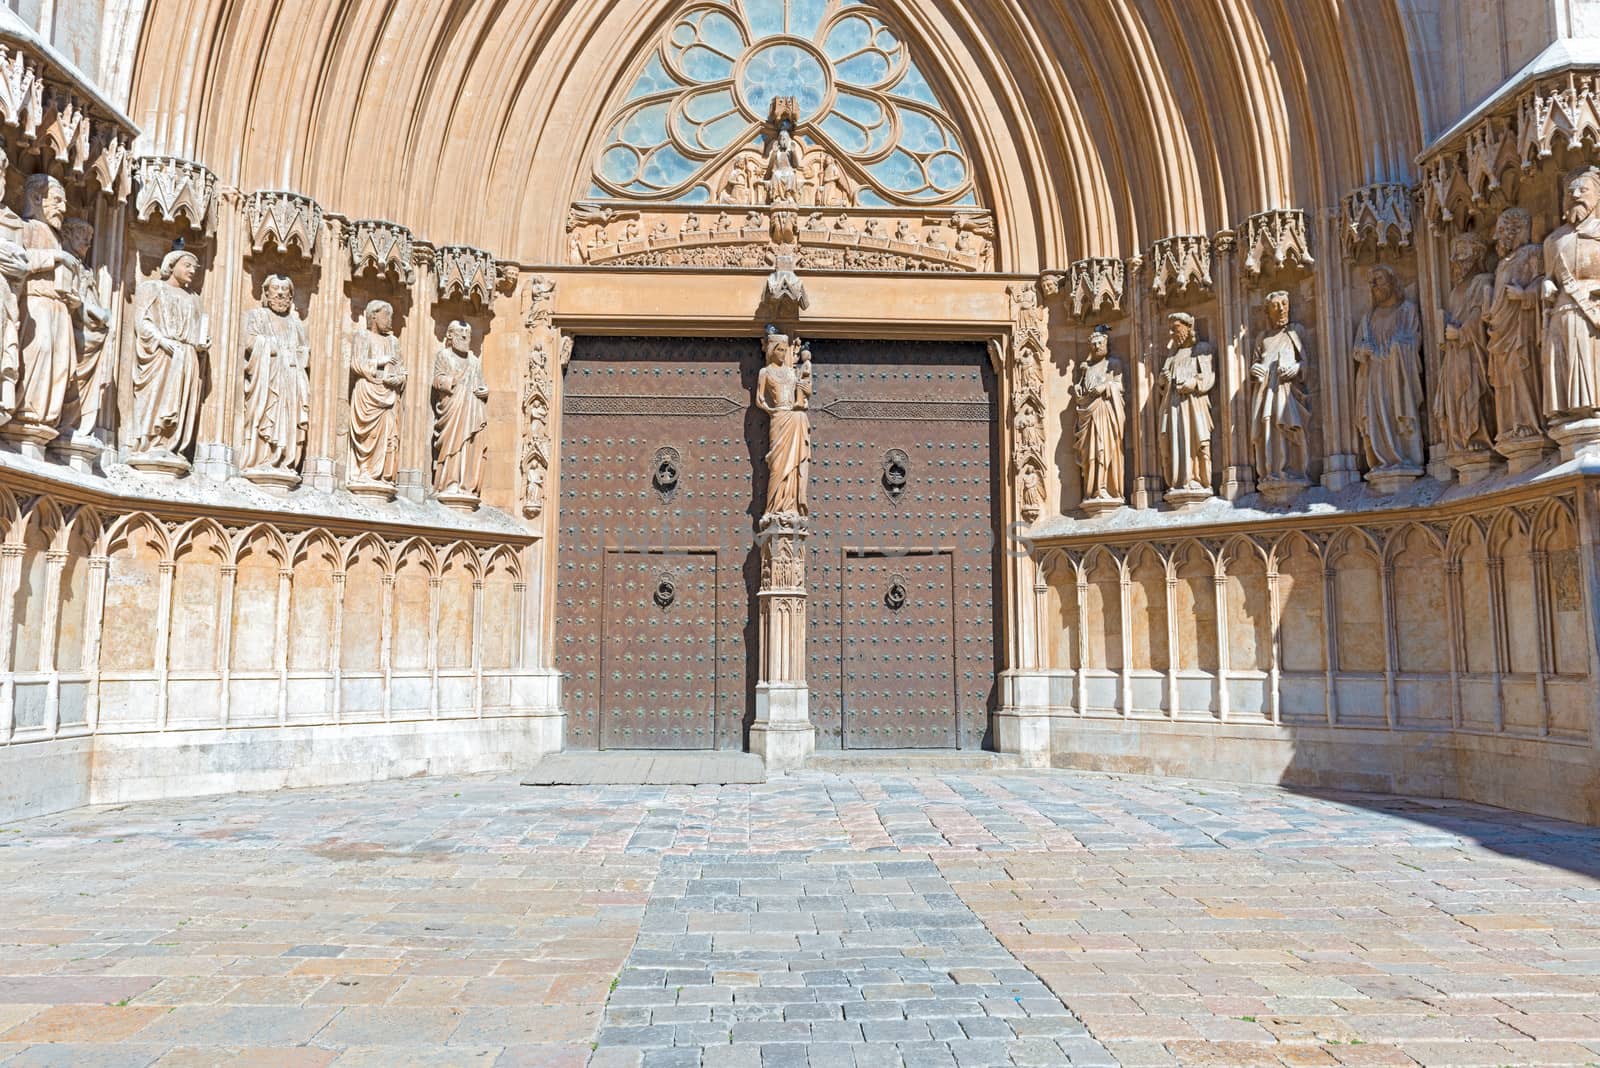  Portal of Tarragona Cathedral Spain by Marcus